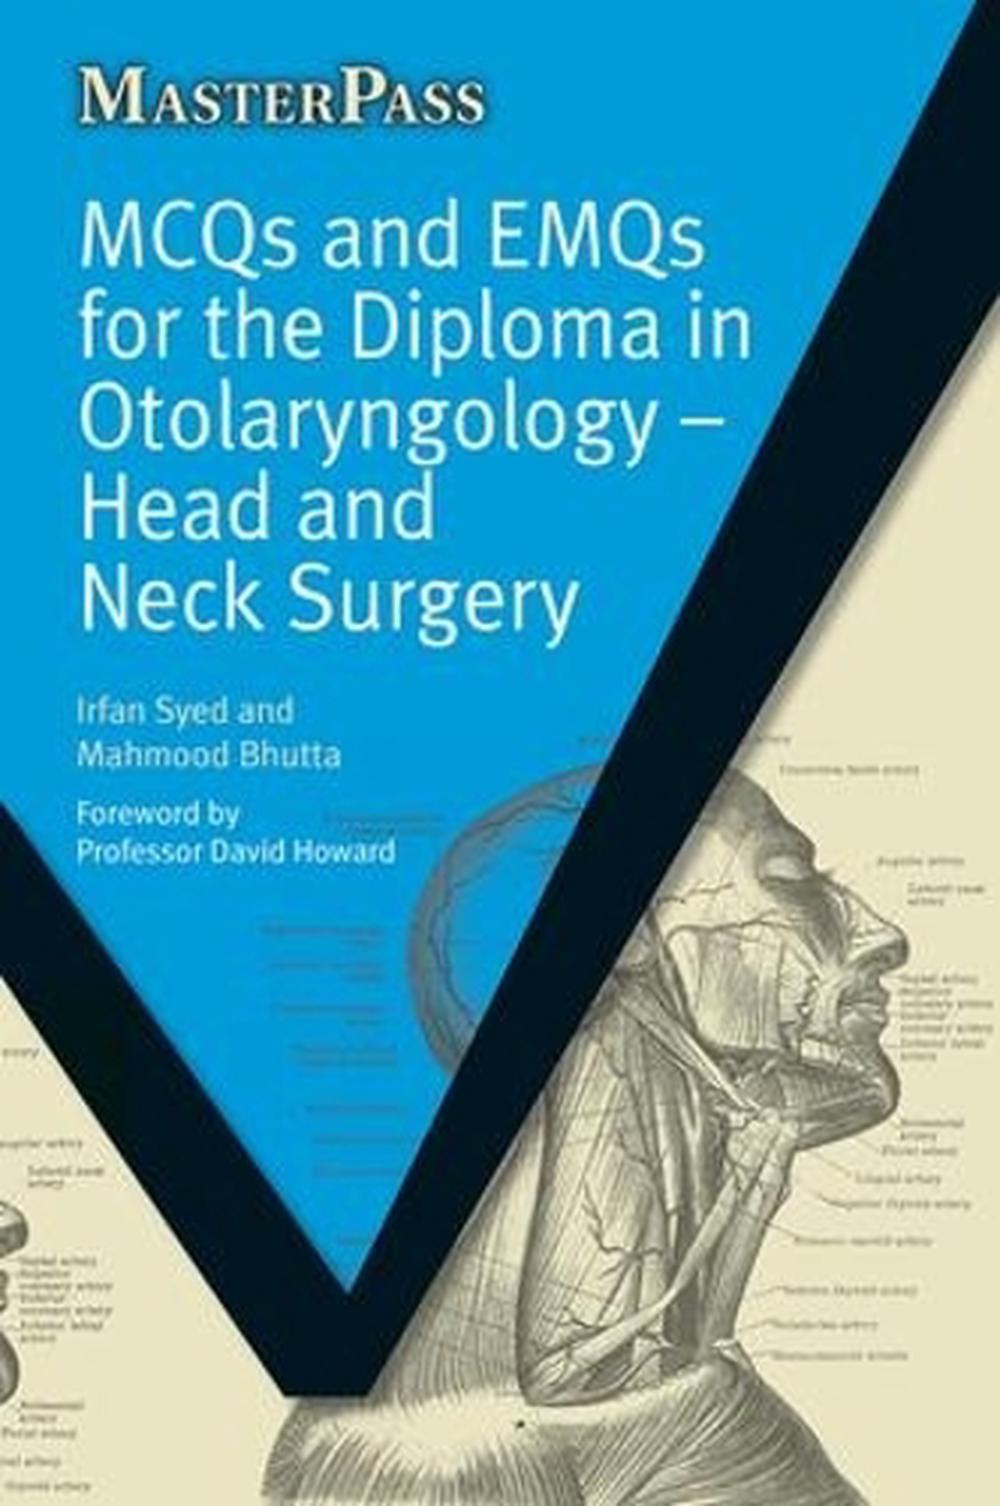 MCQs and EMQs for the Diploma in Otolaryngology Head and Neck Surgery by Irfan 9781846193347 eBay